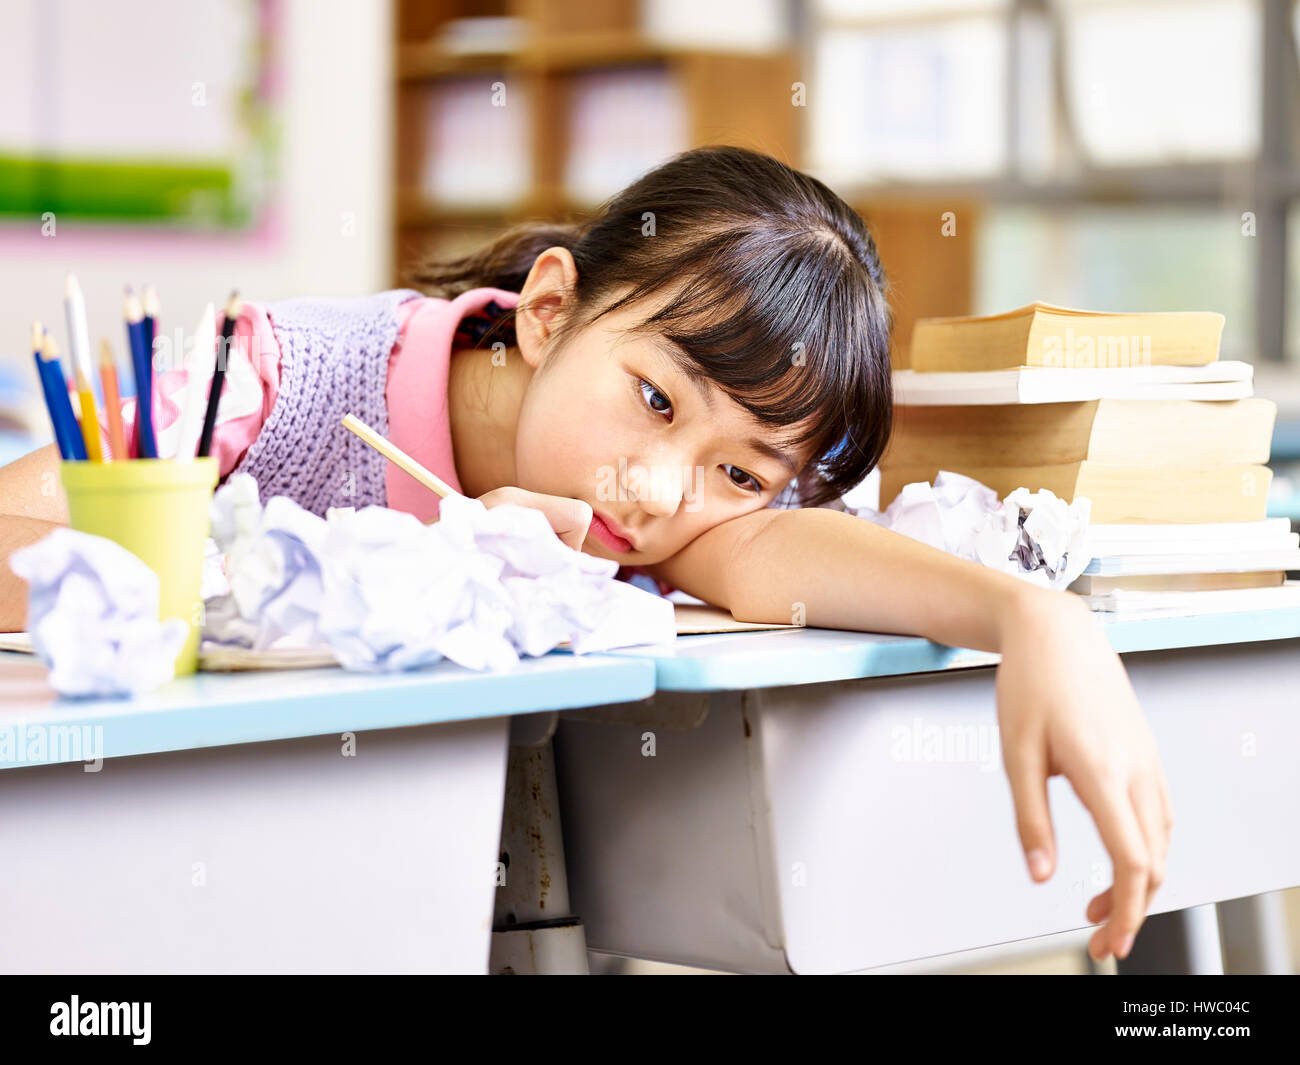 asian elementary school girl frustrated after several failed attempts while writing an essay. Stock Photo